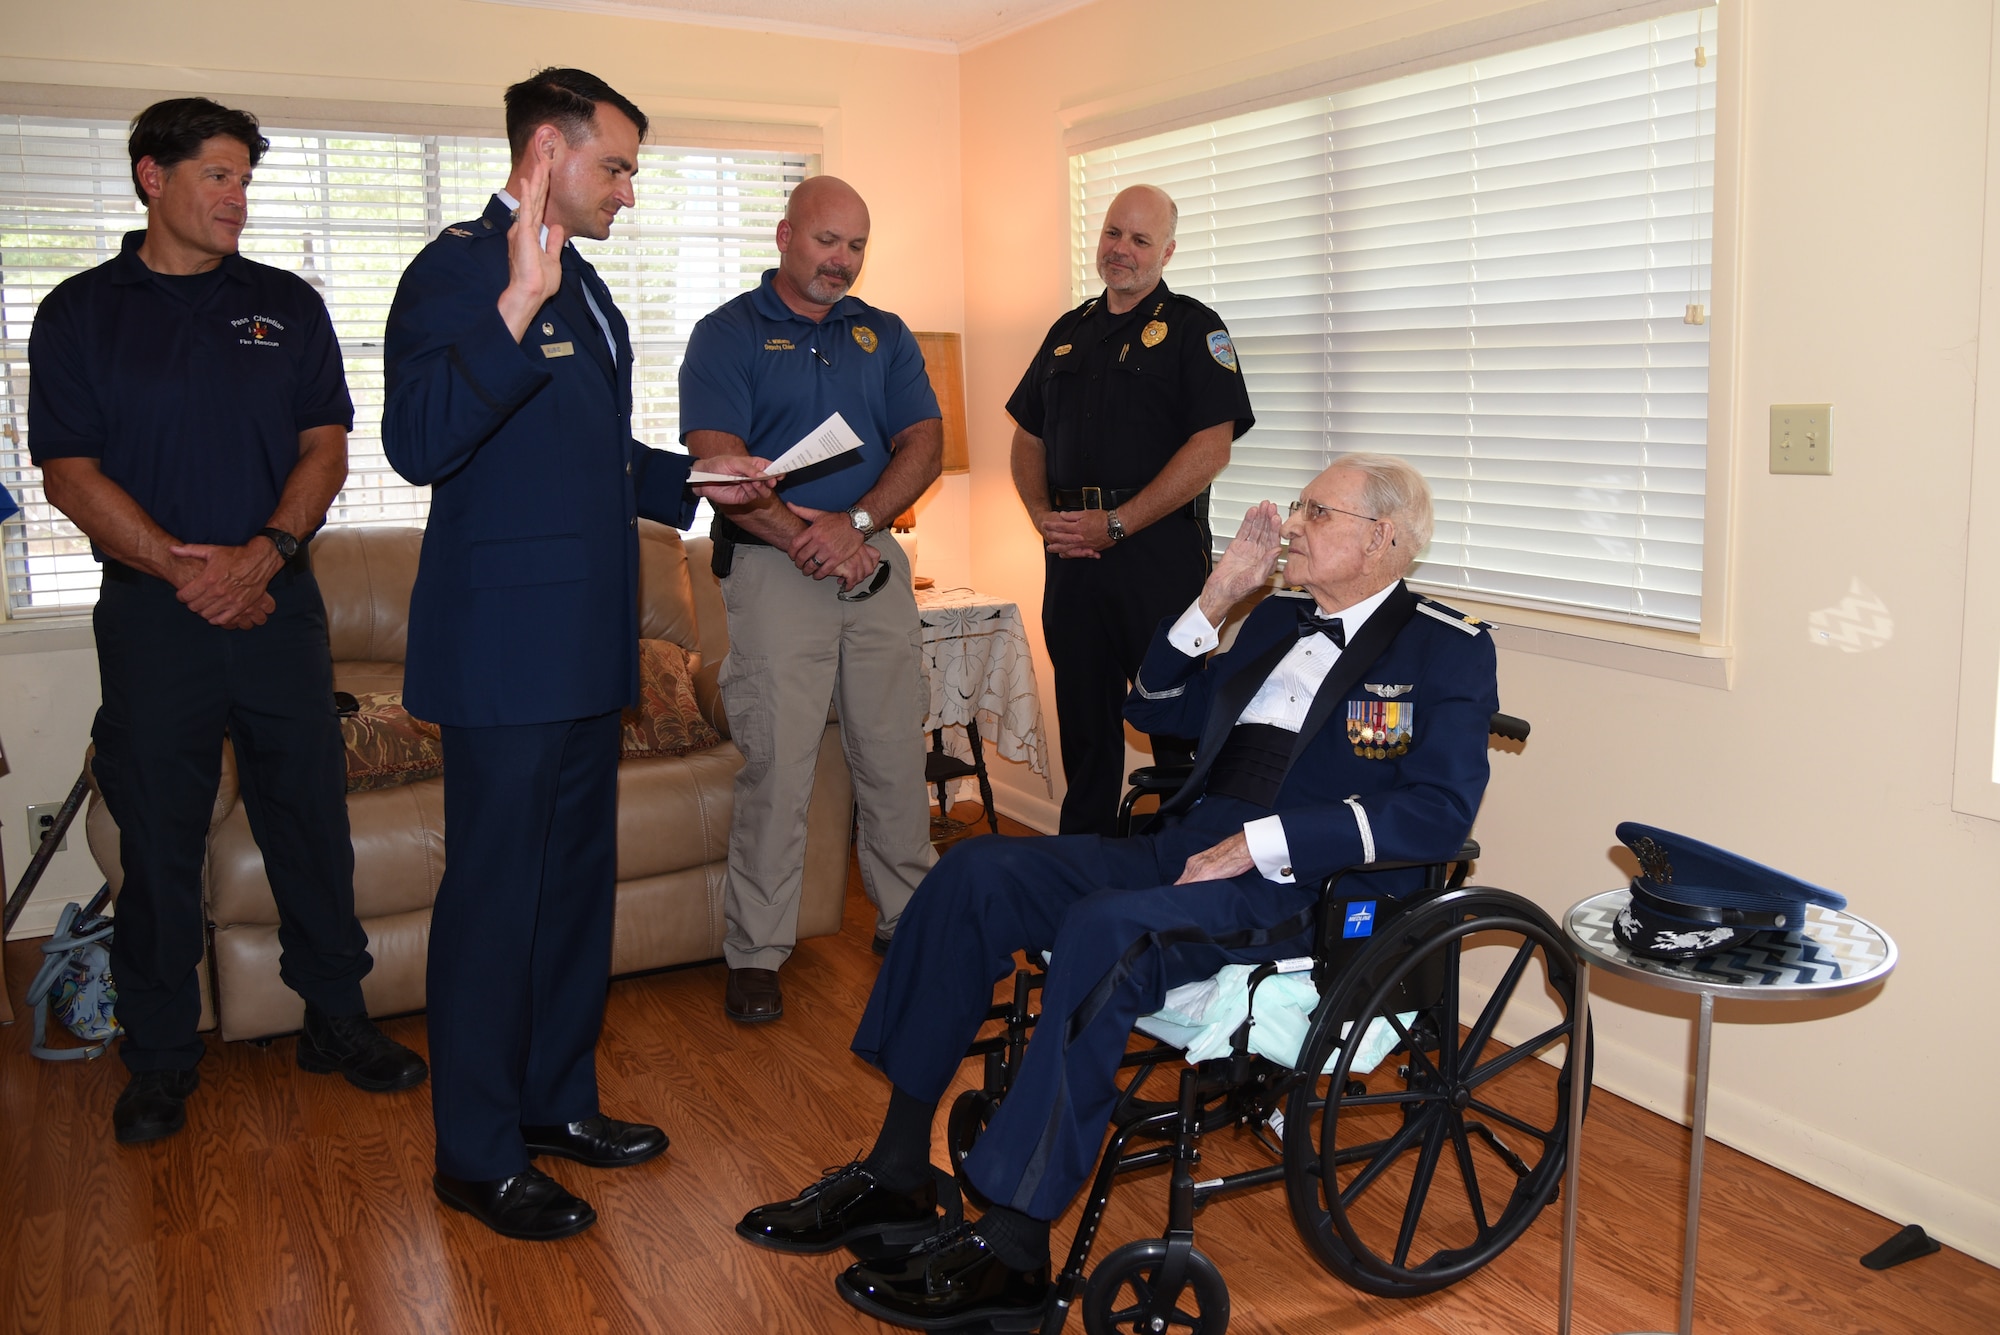 WWII veteran Maj. Thomas Dewey Adams Jr. is promoted during a ceremony presided over by Col. Stuart Rubio, 403rd Wing commander, in his home in Pass Christian, Miss., April 29, 2022. Adams received his honorary promotion to major 55 years after he retired from service. (U.S. Air Force photo by Jessica L. Kendziorek)